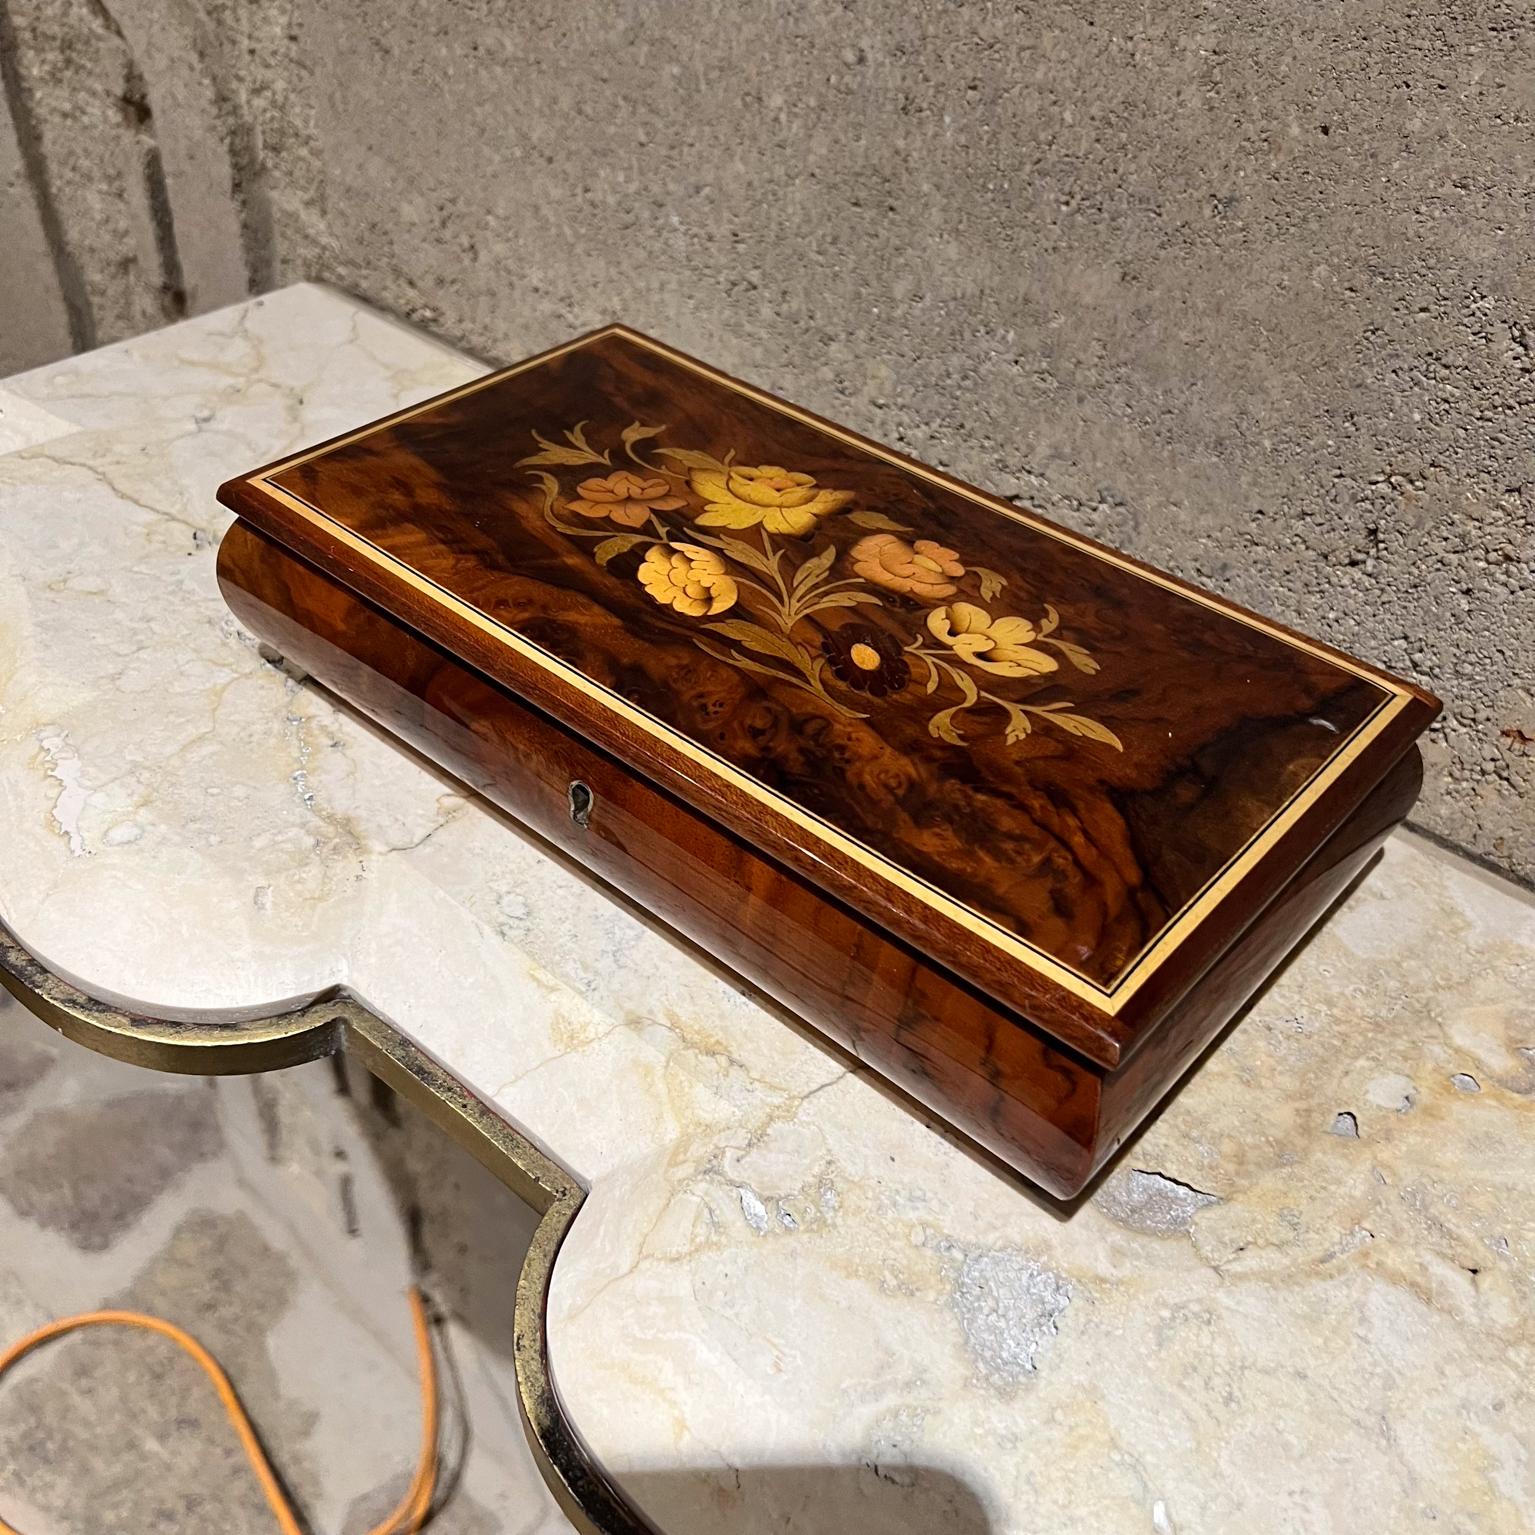 1970s Vintage Reuge Wood Music Box Italian inlaid marquetry jewelry box.
Elegant footed music box crafted fruitwood.
Glossy Enamel Finish.
Red velvet interior.
Reuge Ste Croix Demain Collection.
10.5 w x 5.75 d x 2.5 h
New key to rewind and play